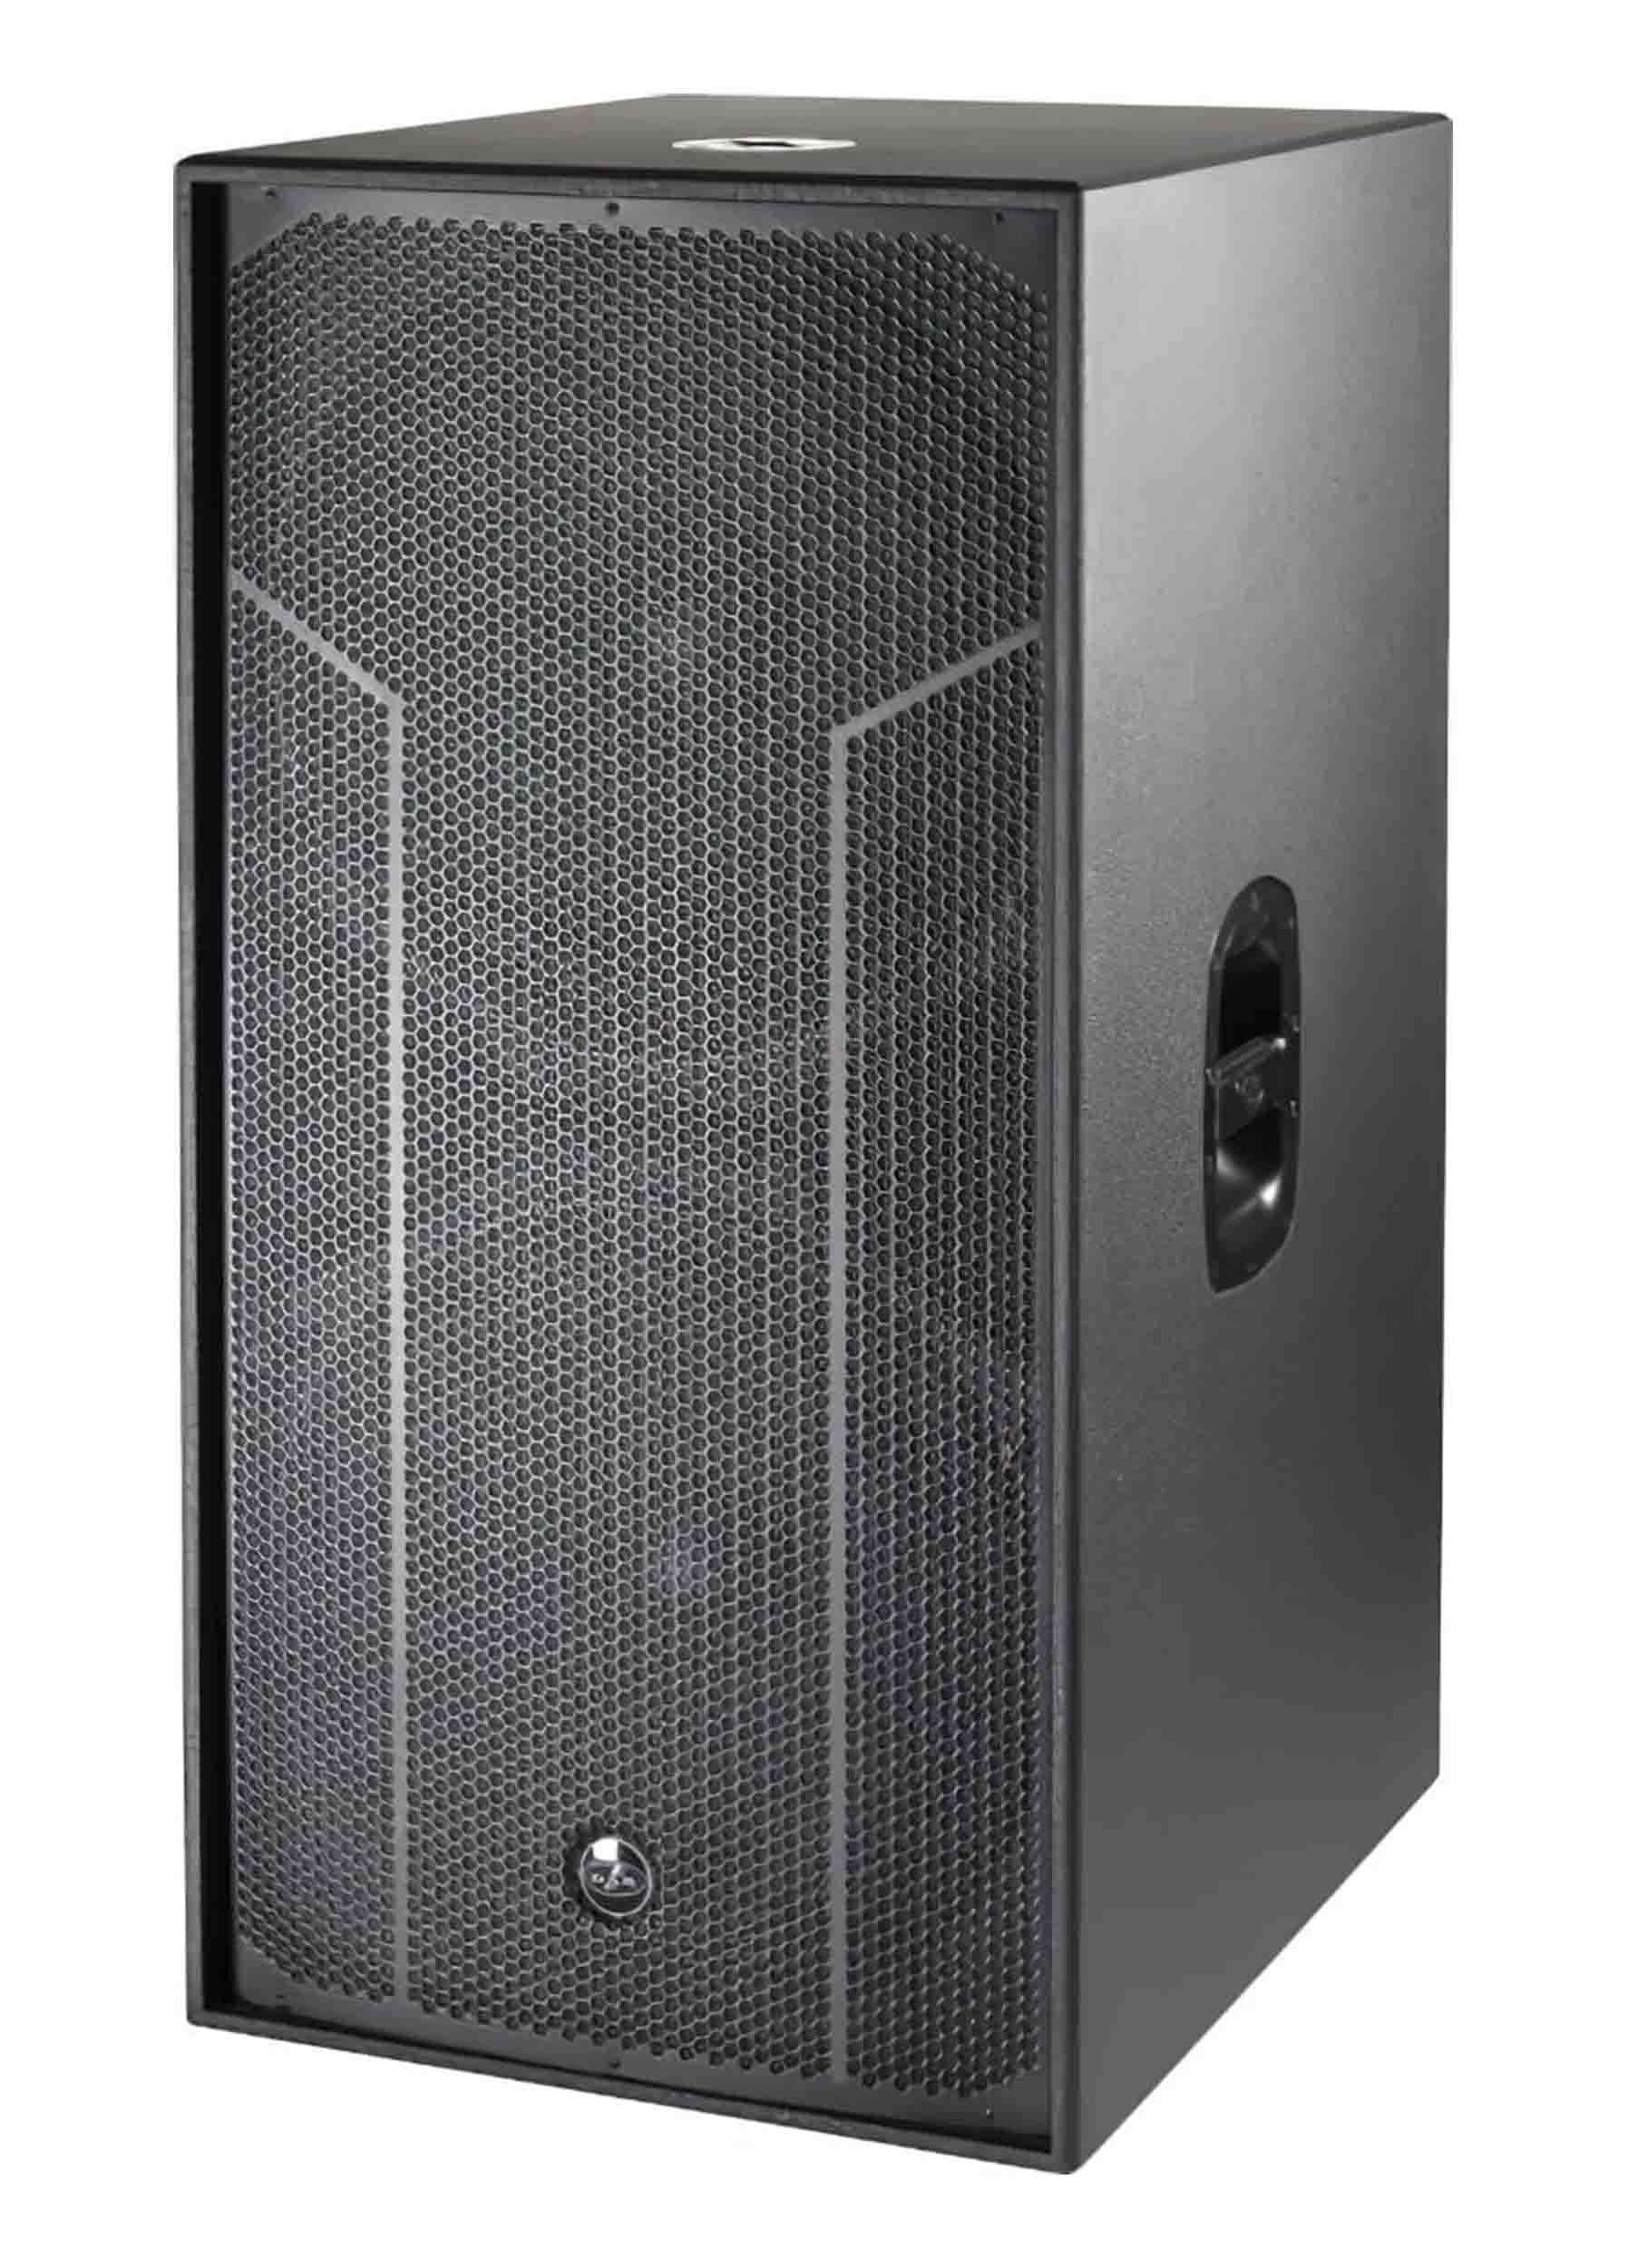 DAS Audio ACTION-S218A-115, Dual 18-Inch 3200W Powered Subwoofer System with DSP - Black by DAS Audio